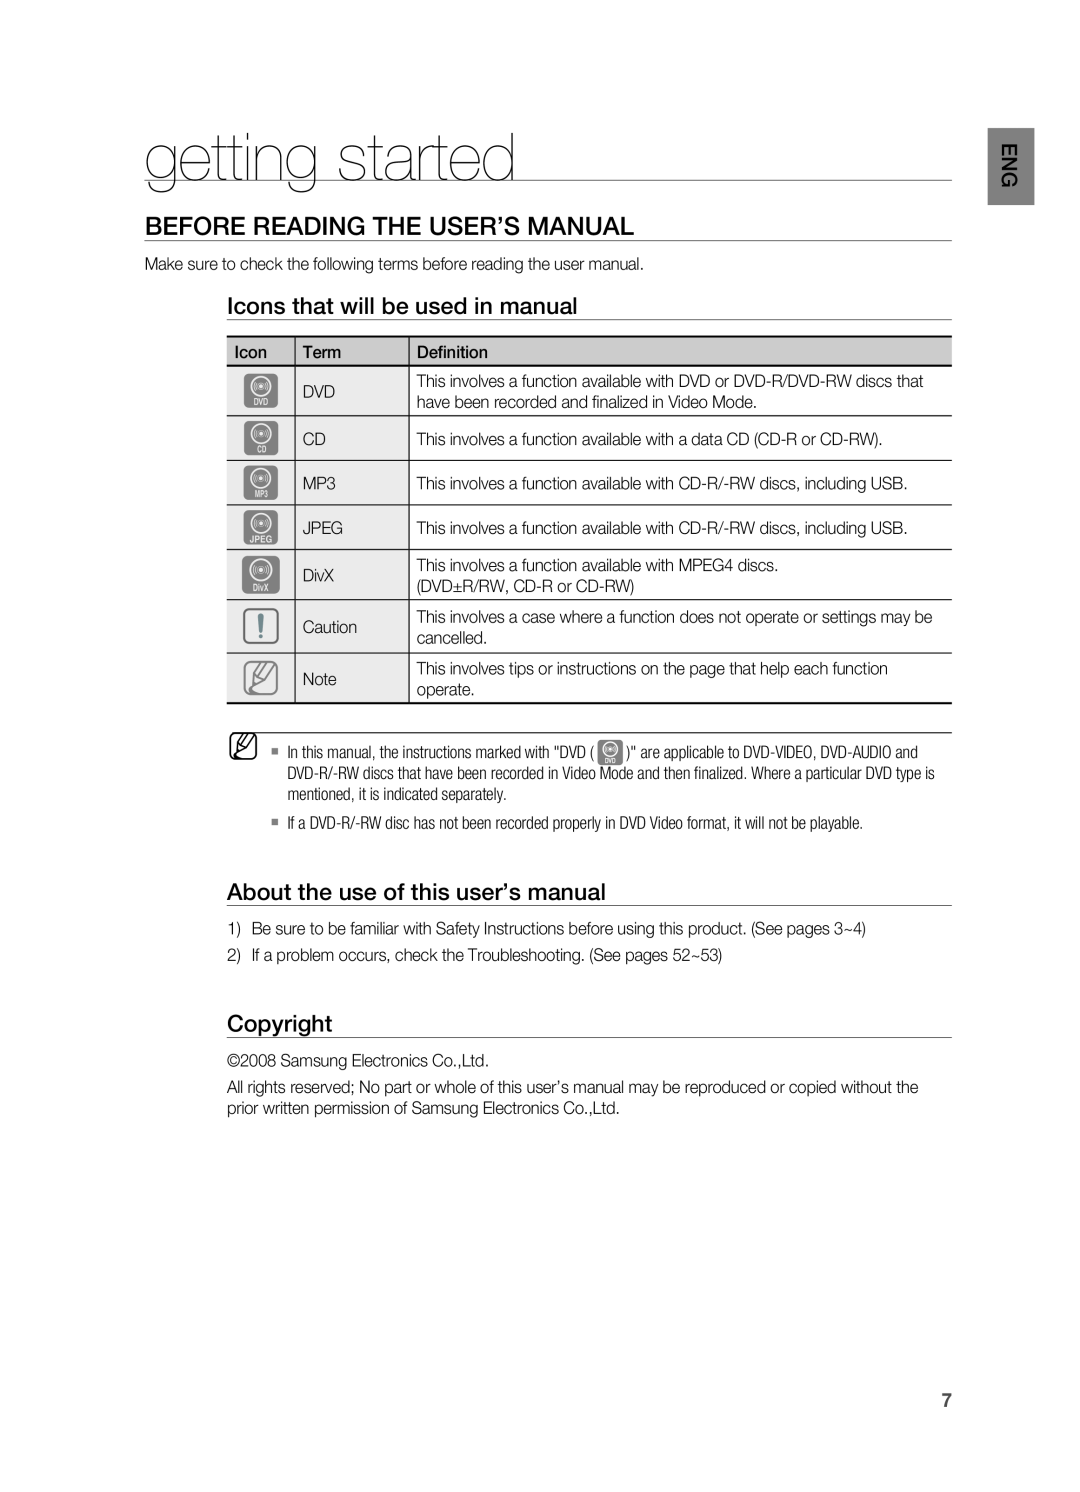 Samsung HT-X710 user manual getting started, Icons that will be used in manual, Copyright 